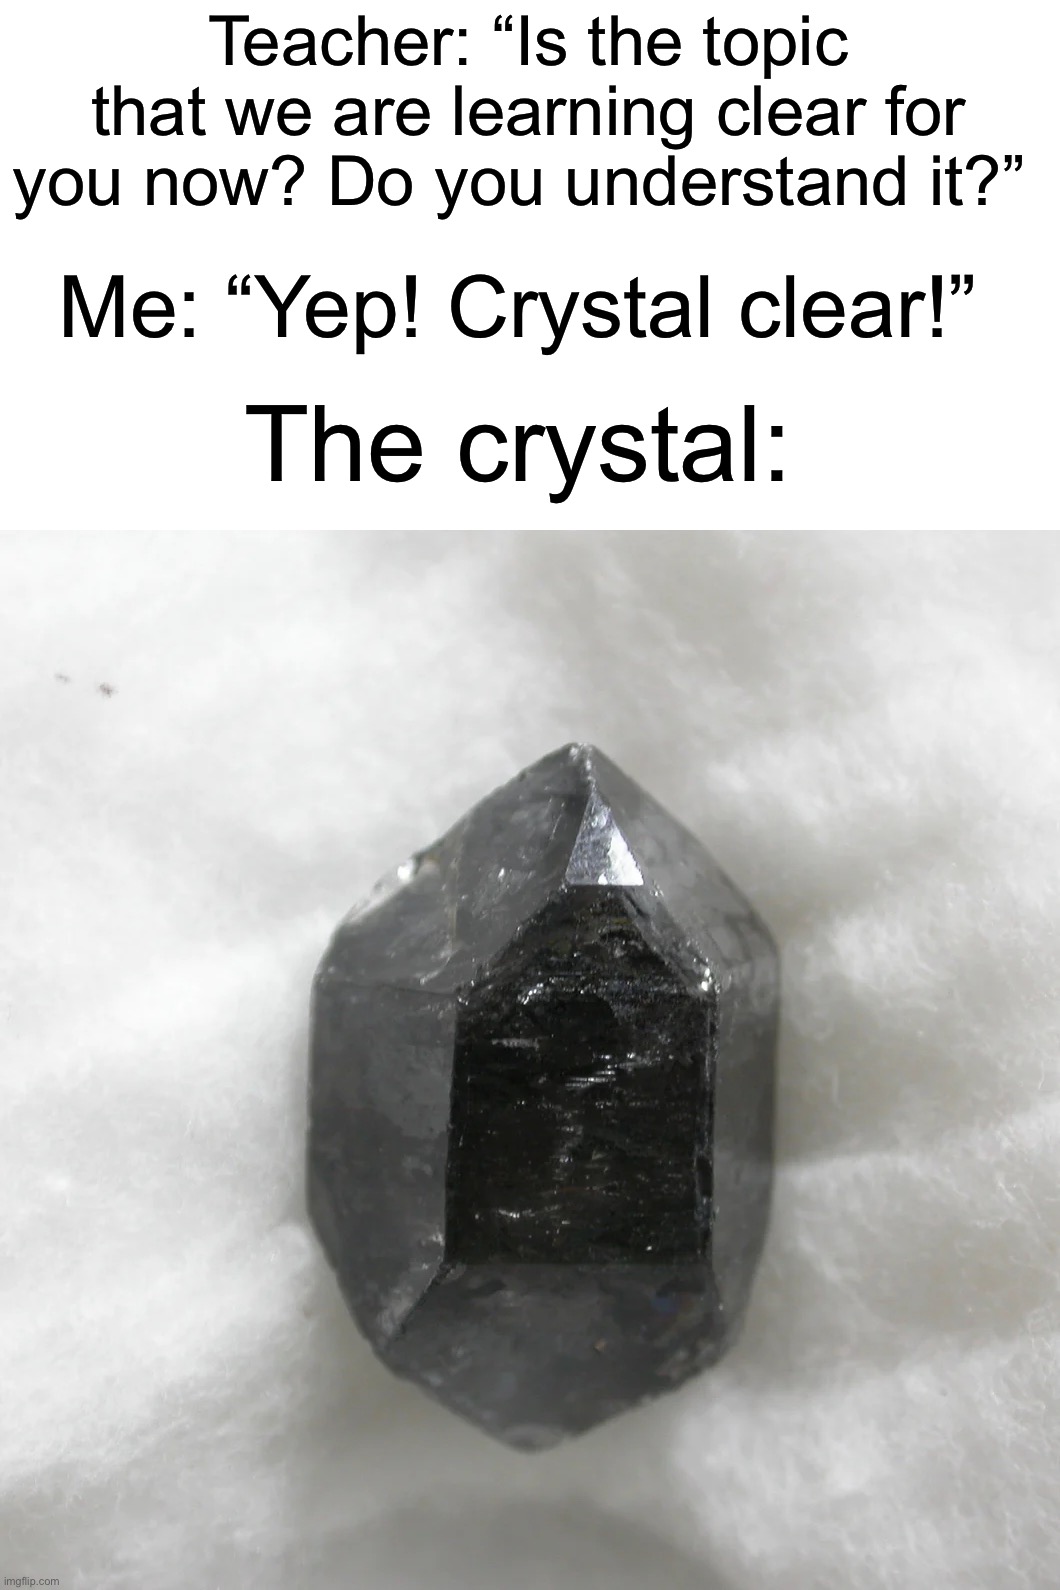 VERY clear, I 100 PERCENT understand the material | Teacher: “Is the topic that we are learning clear for you now? Do you understand it?”; Me: “Yep! Crystal clear!”; The crystal: | image tagged in memes,funny,true story,relatable memes,school,funny memes | made w/ Imgflip meme maker